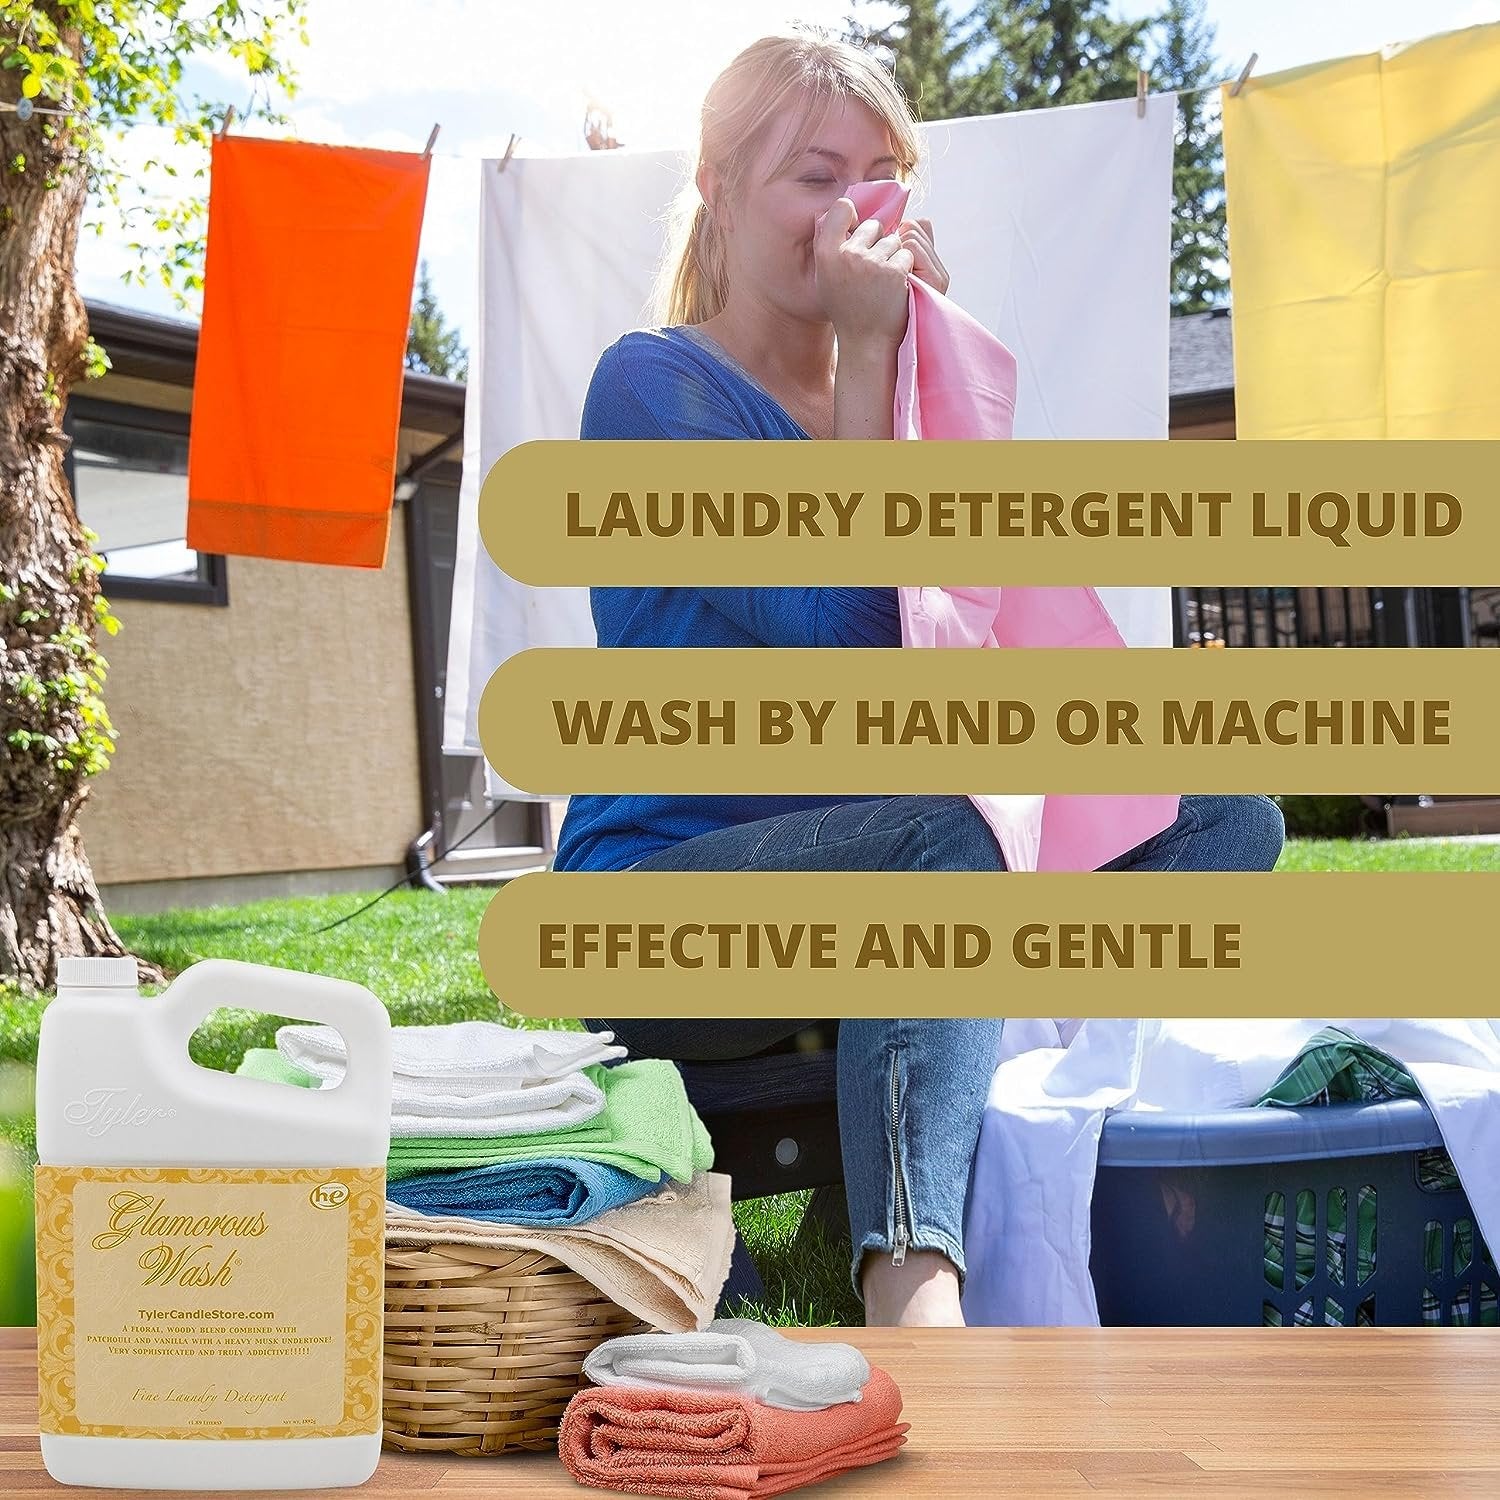 Worldwide Nutrition Bundle, 2 Items: Tyler Glamorous Wash Wishlist Scent Fine Laundry Liquid Detergent - Hand and Machine Washable - 1.89L (64 Fl Oz) Container and Multi-Purpose Key Chain